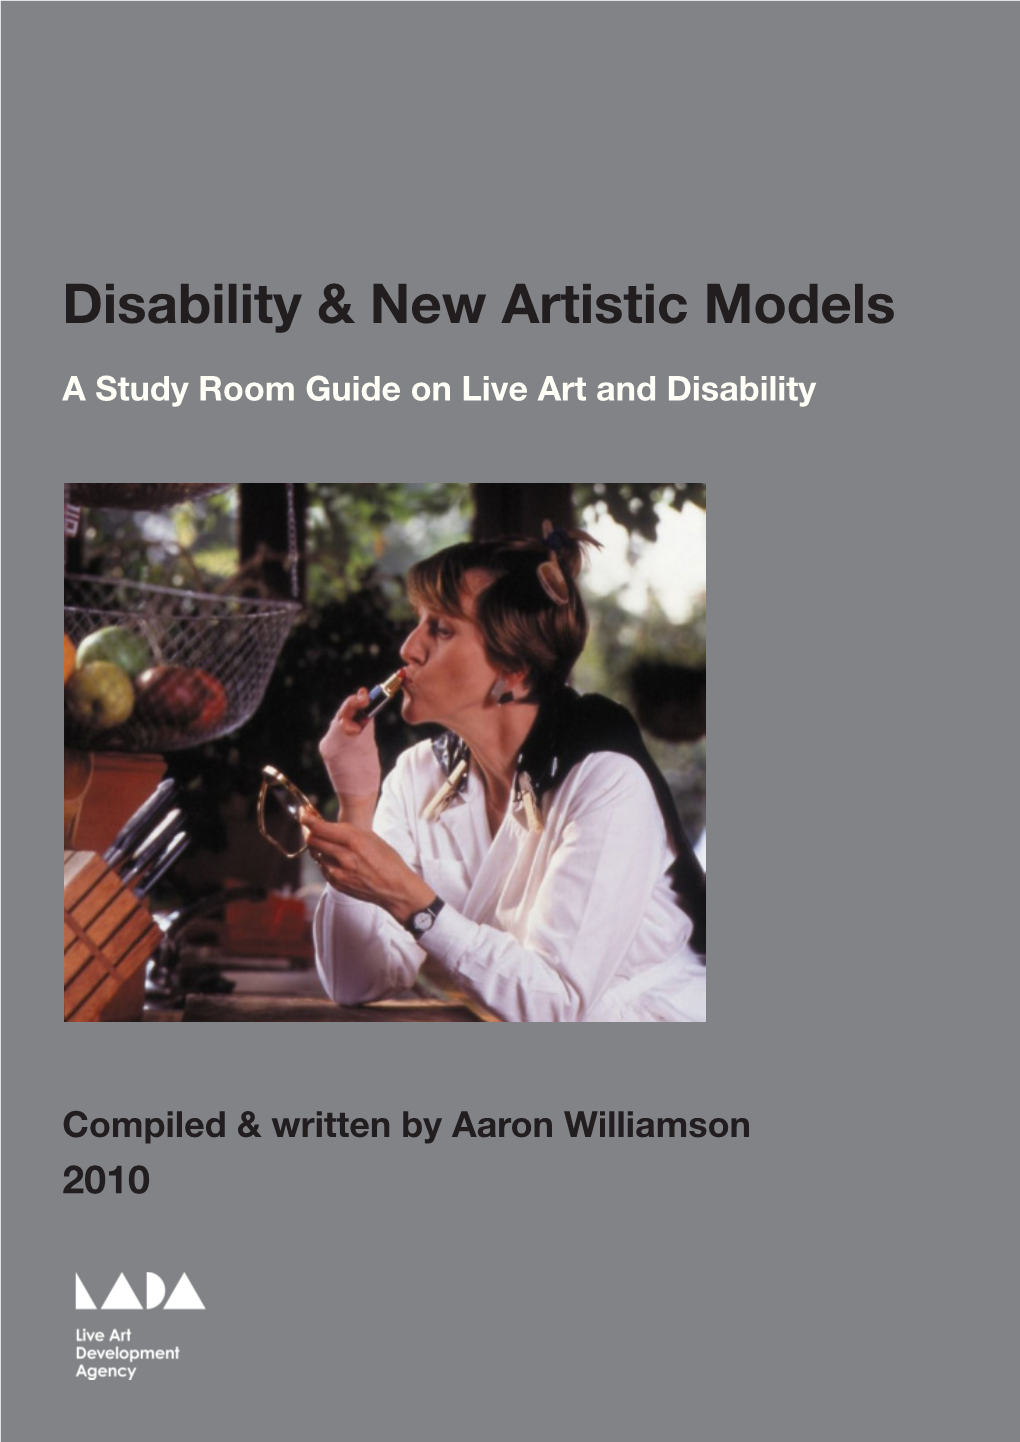 Disability & New Artistic Models